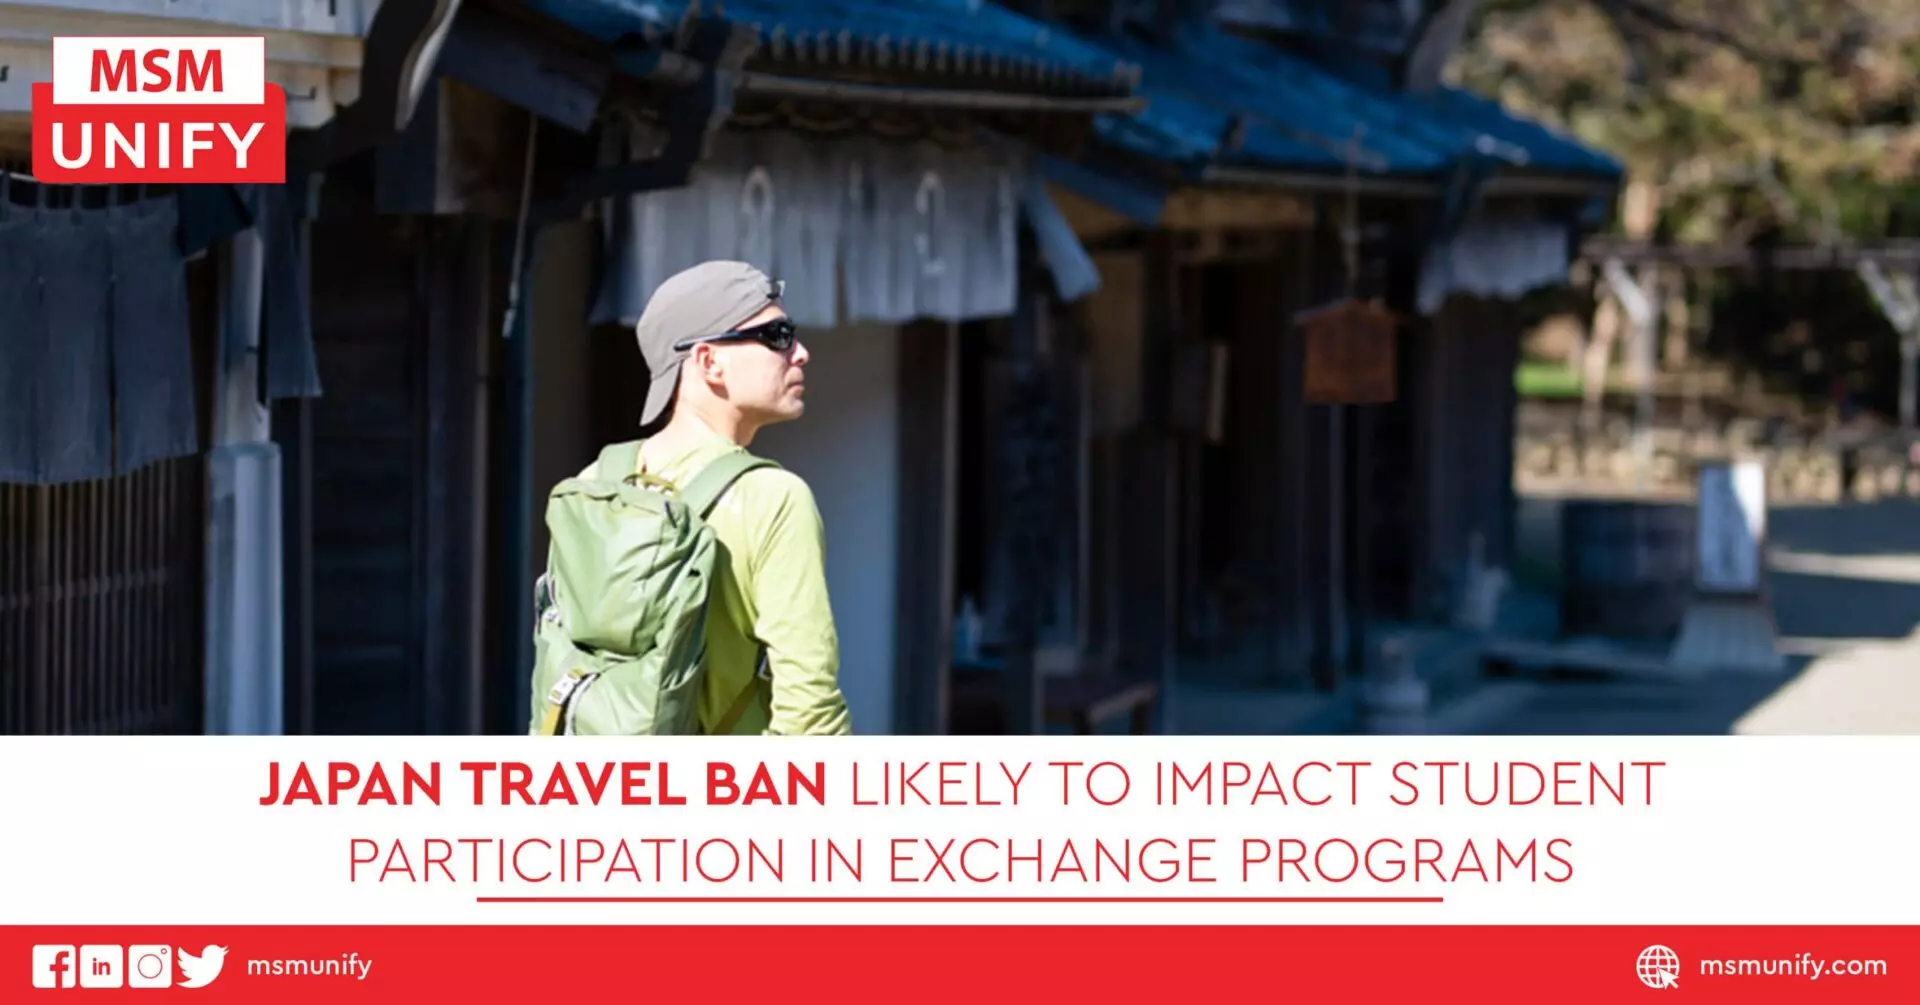 Japan Travel Ban Likely to Impact Student Participation in Exchange Programs scaled 1